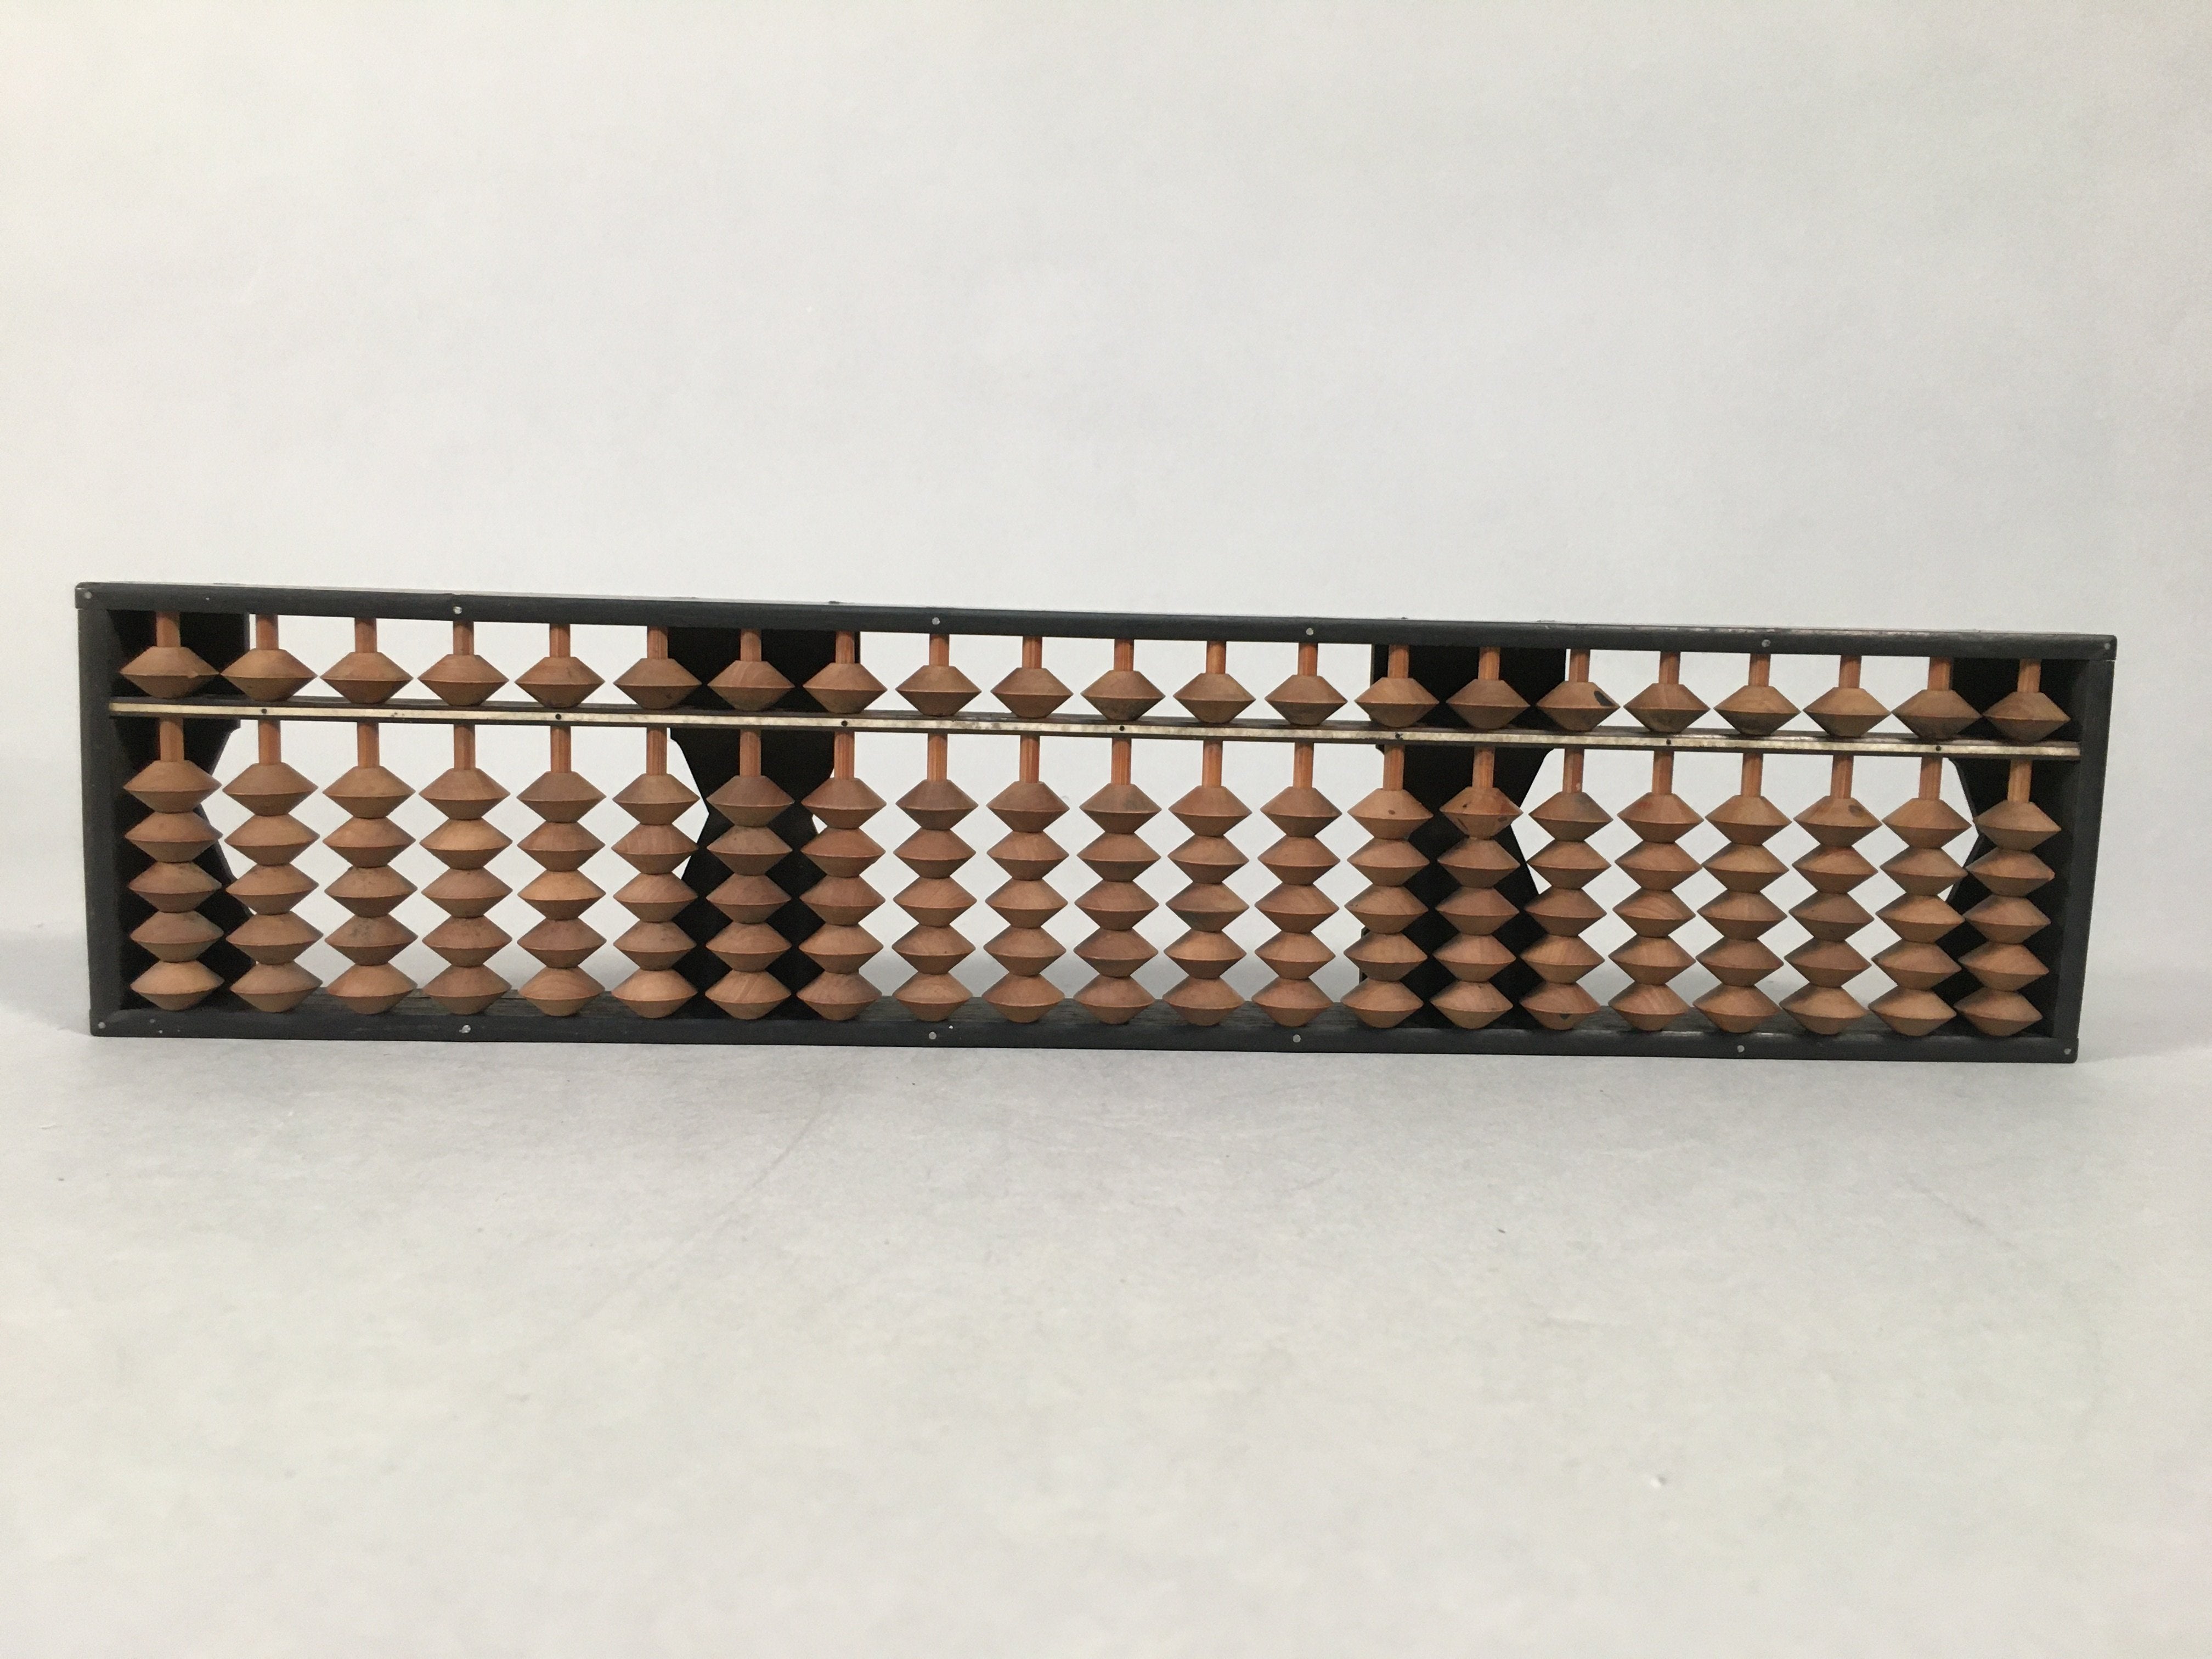 Japanese Wooden Abacus Calculating Tool 1/5 Beads 21 Rows Vtg Soroban ST46